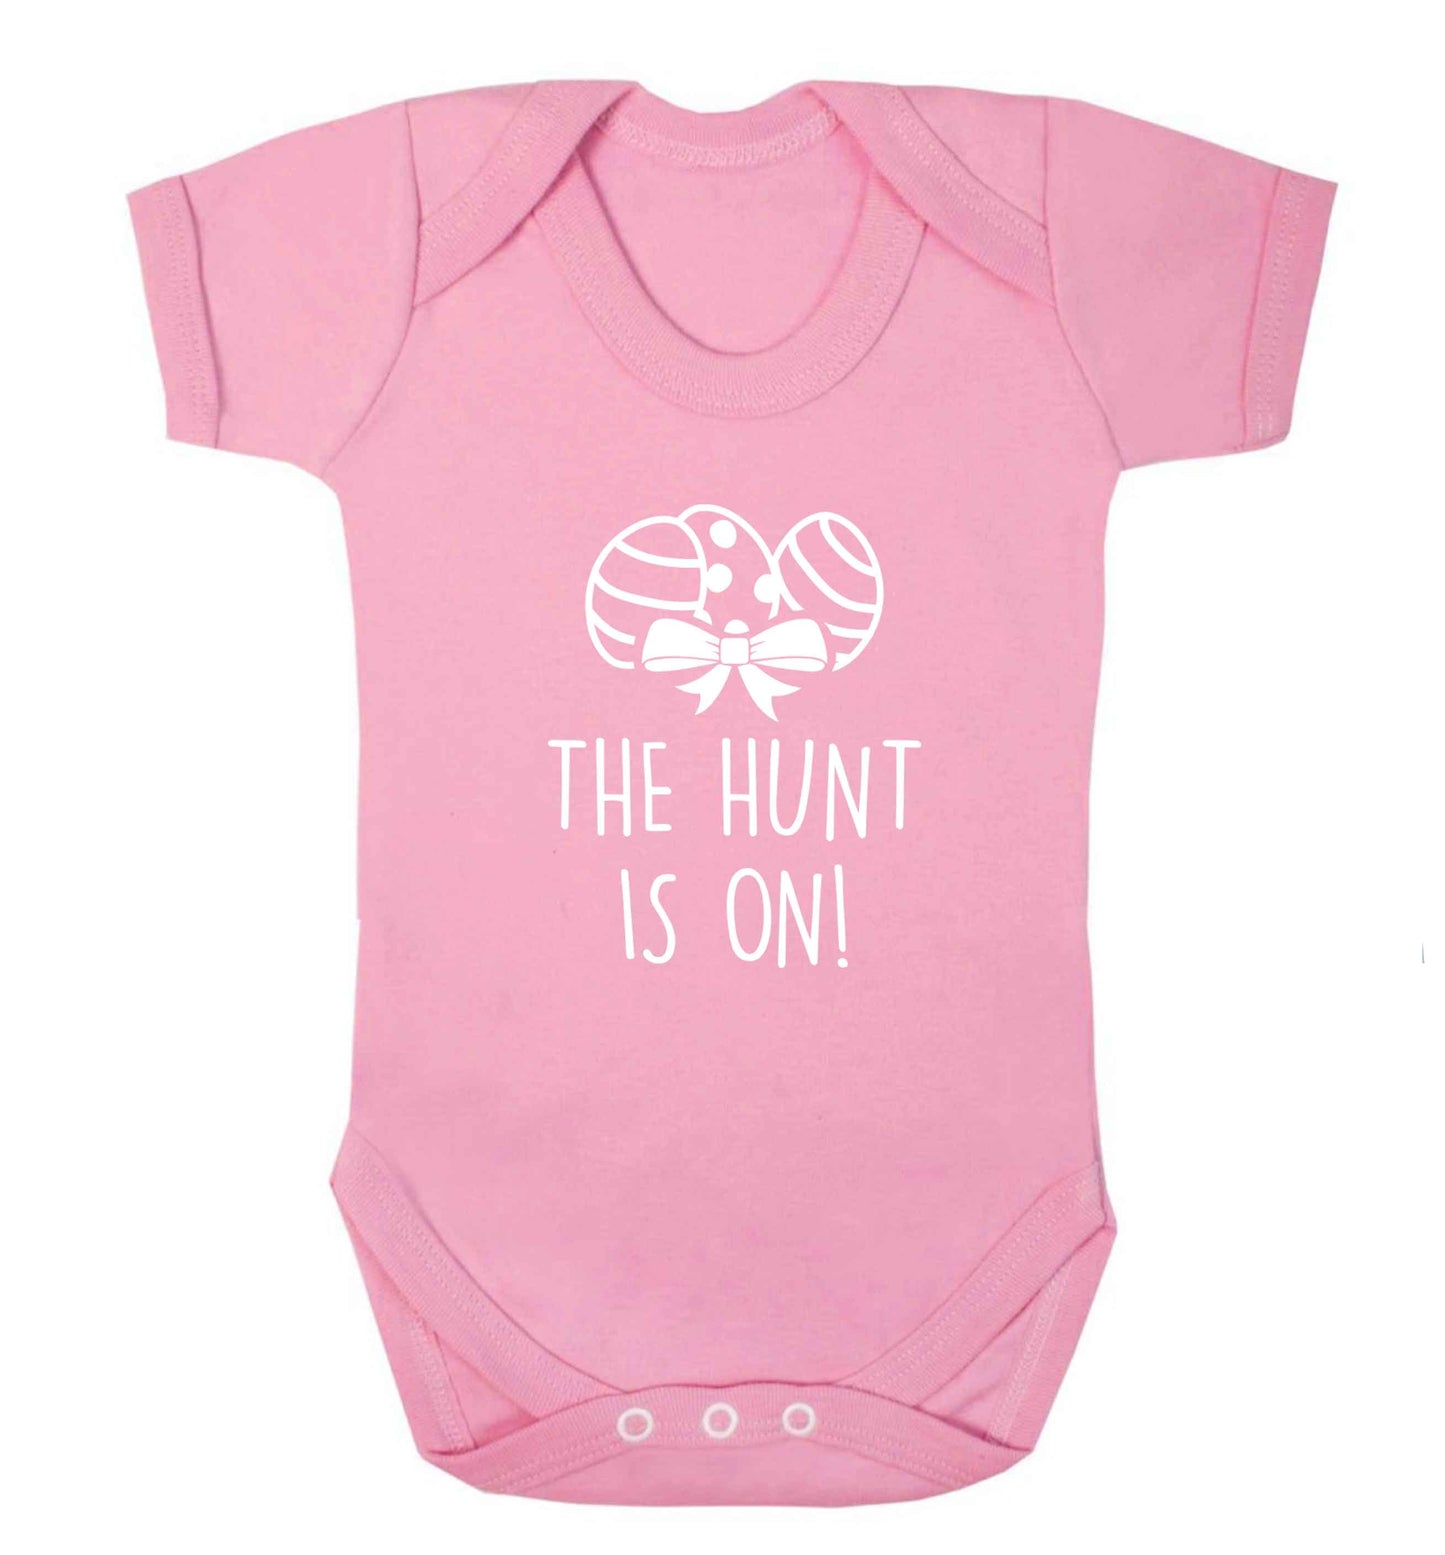 The hunt is on baby vest pale pink 18-24 months